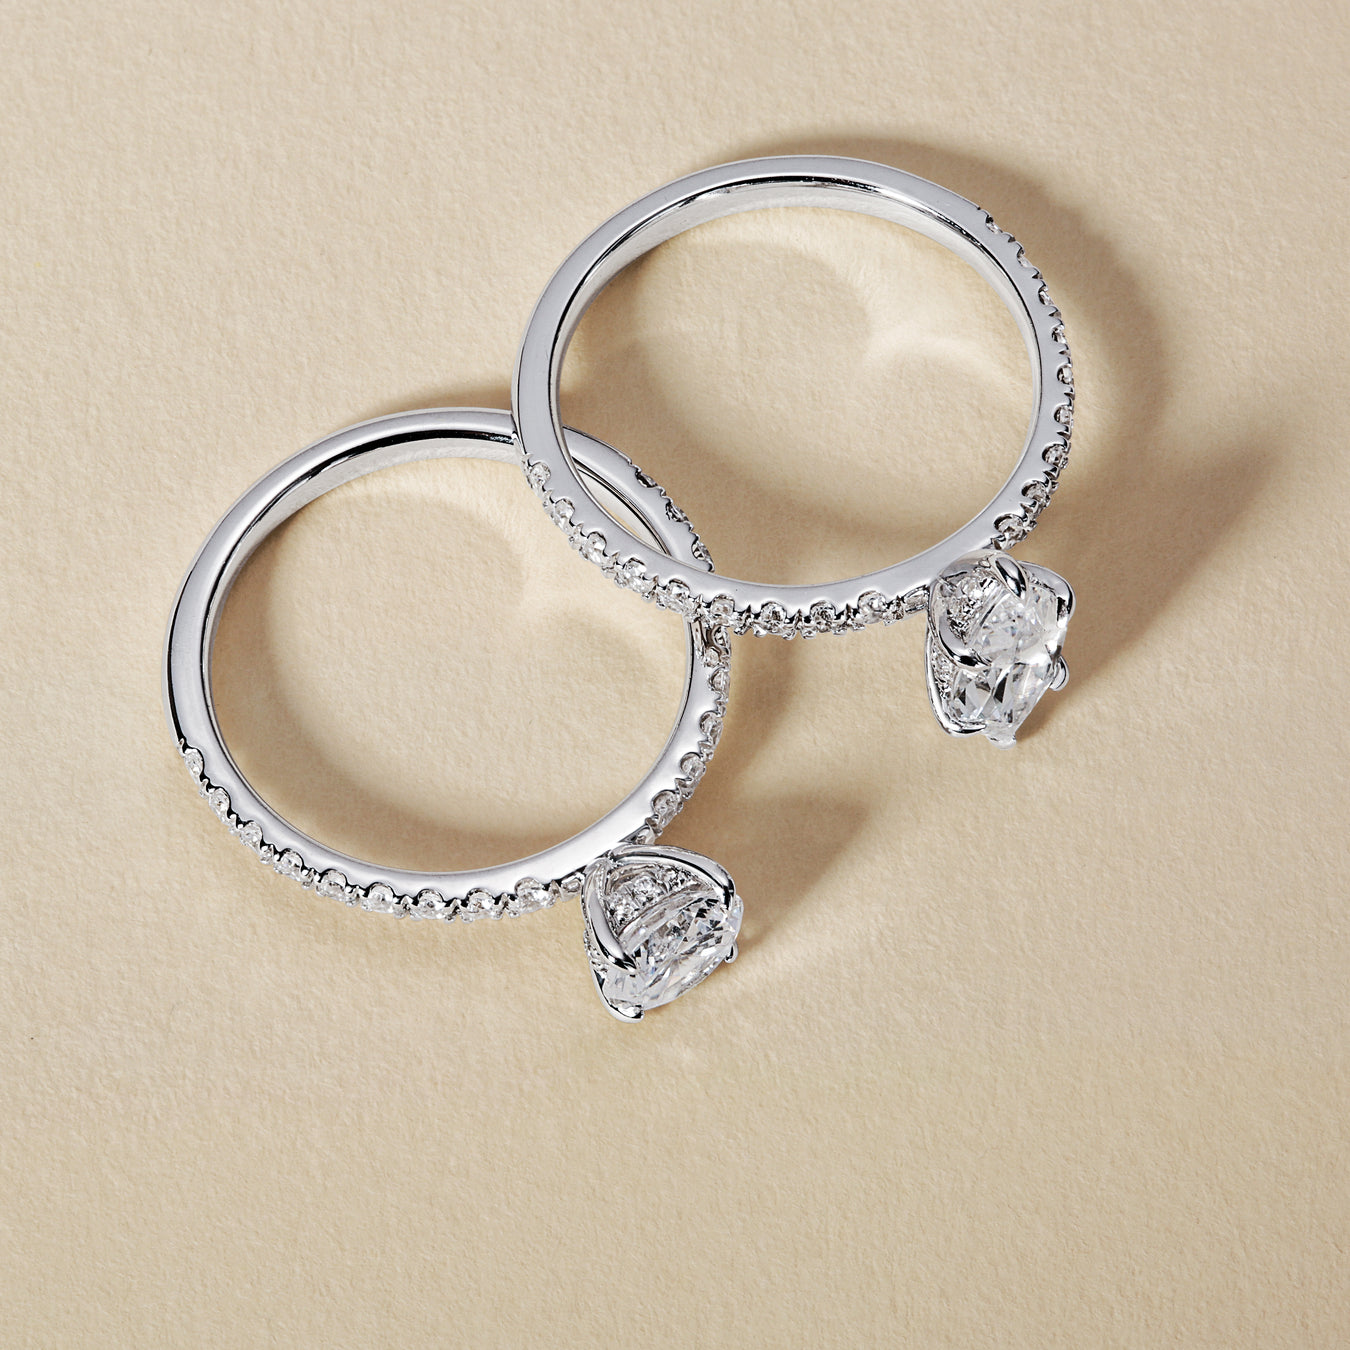 Hiddden Halo Engagement Rings